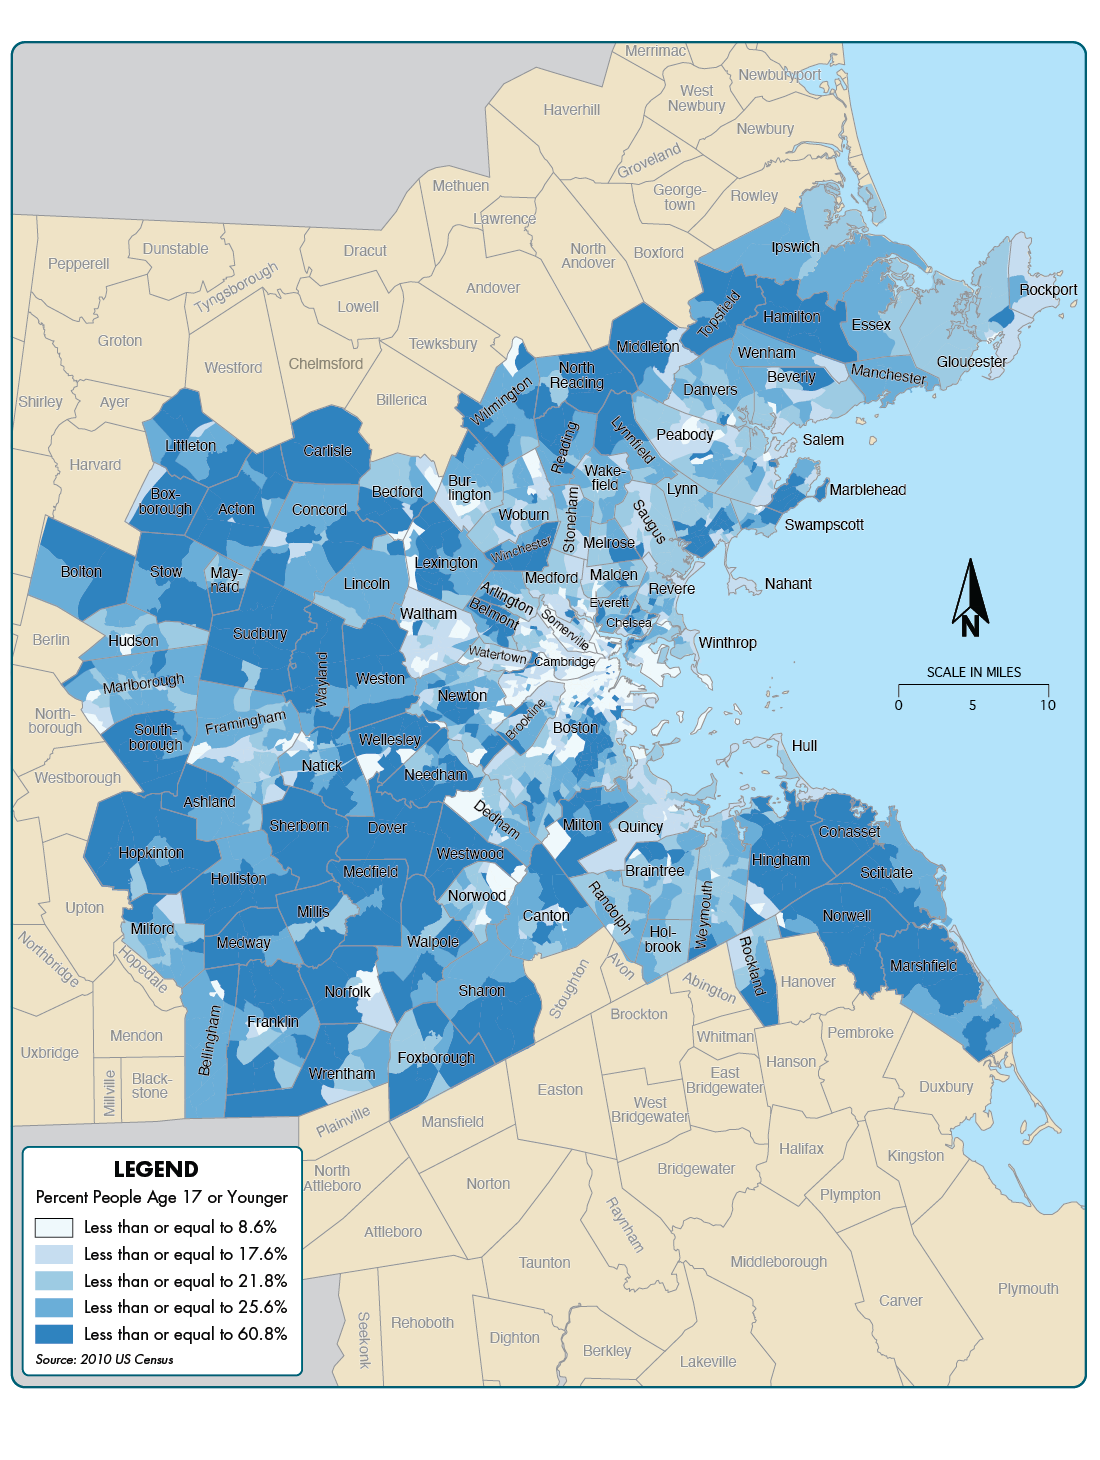 Figure 6-5 is a map showing the percent of the population that is age 17 or younger across the 97 communities in the Boston region.